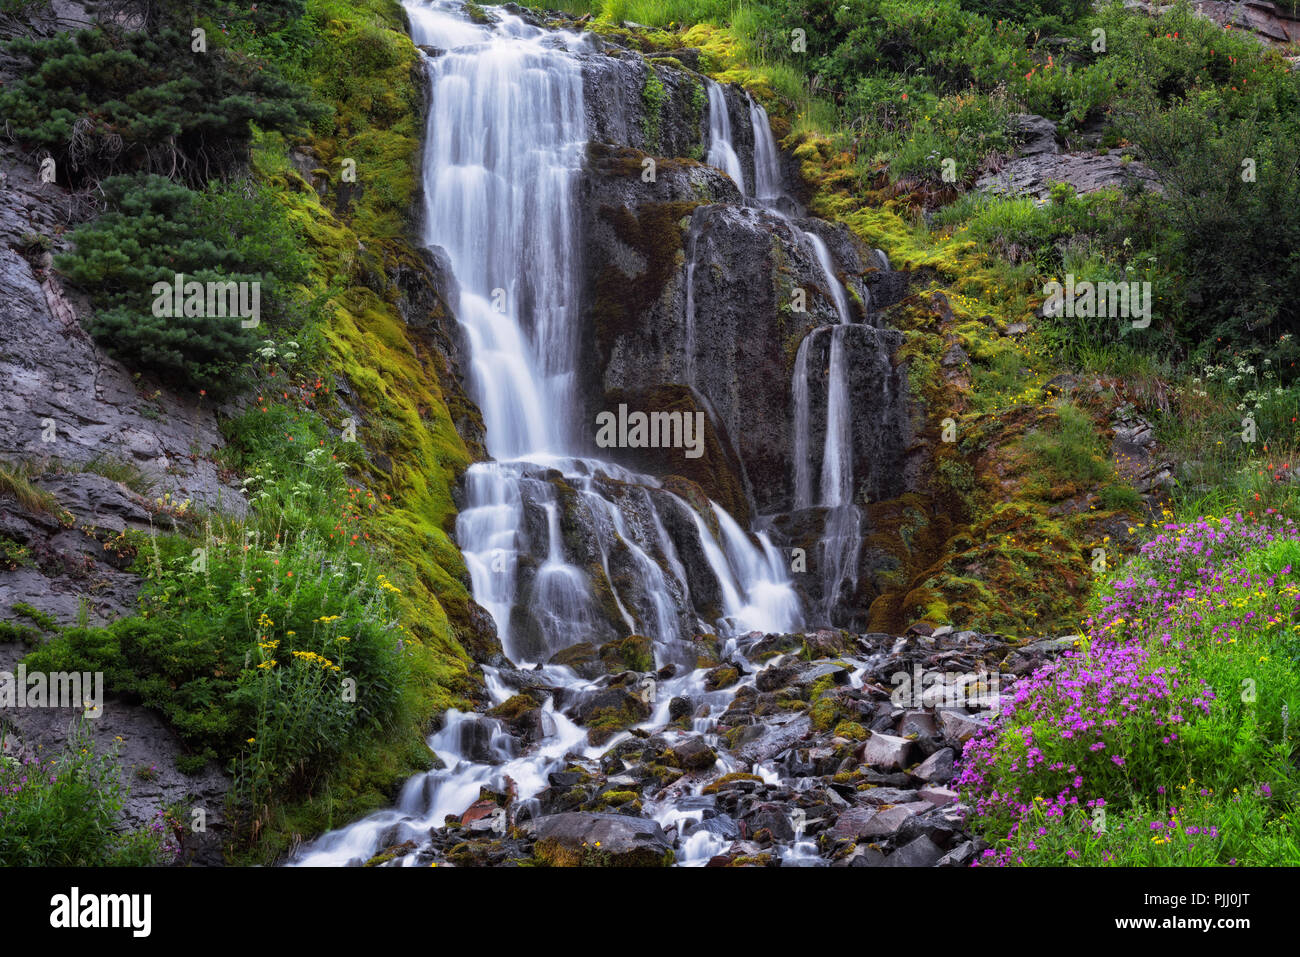 Summer wildflowers bloom by Vidae Falls in Oregon’s Crater Lake National Park. Stock Photo